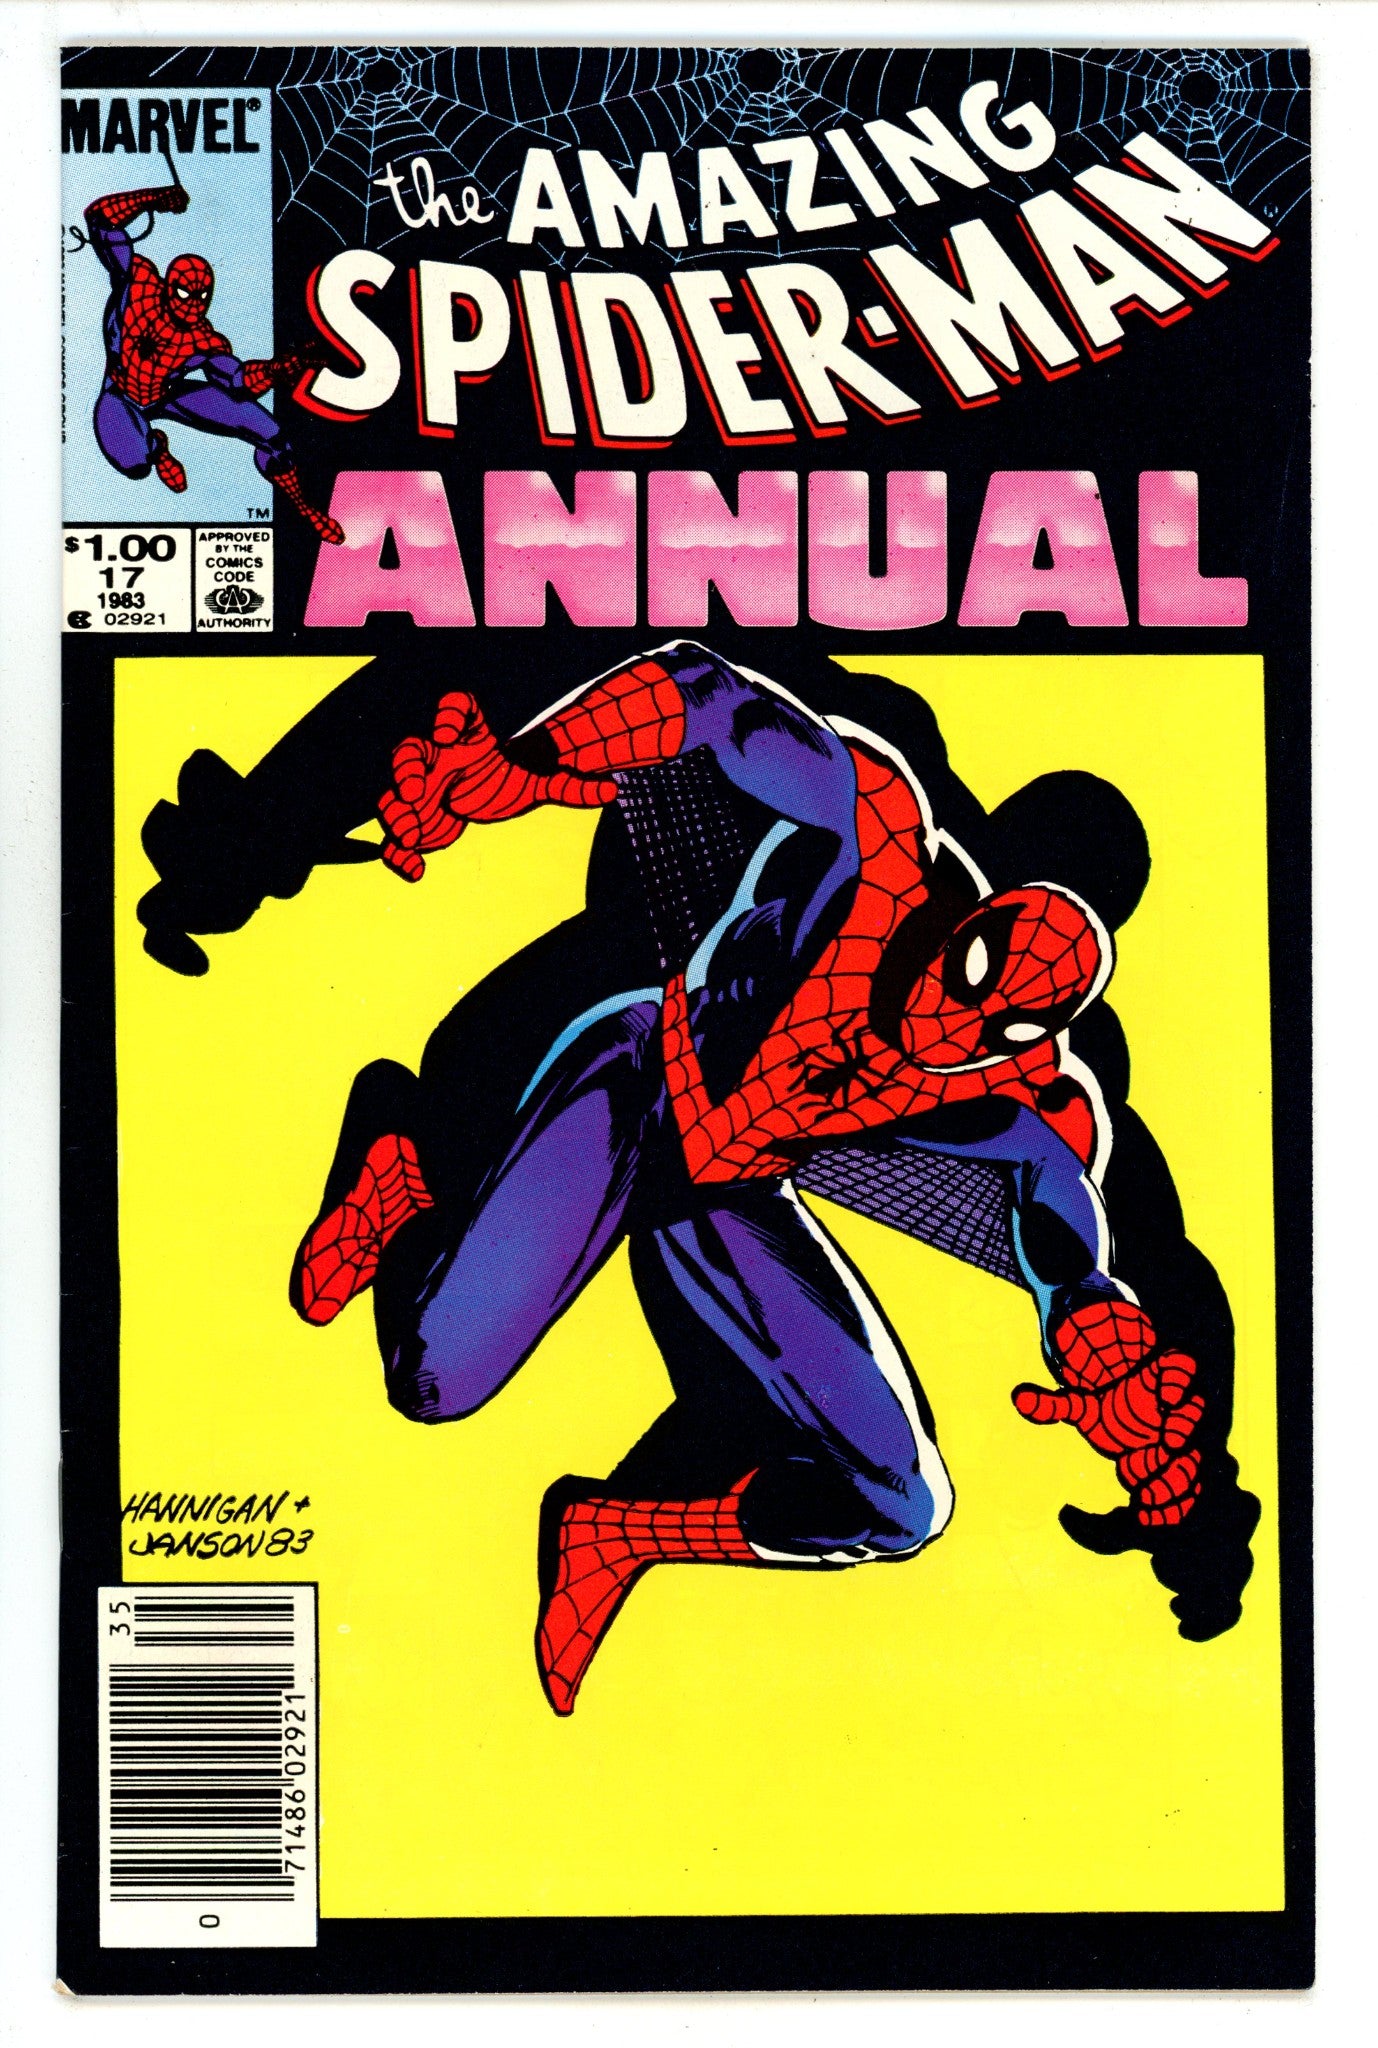 The Amazing Spider-Man Annual Vol 1 17 FN- (5.5) (1983) Newsstand 